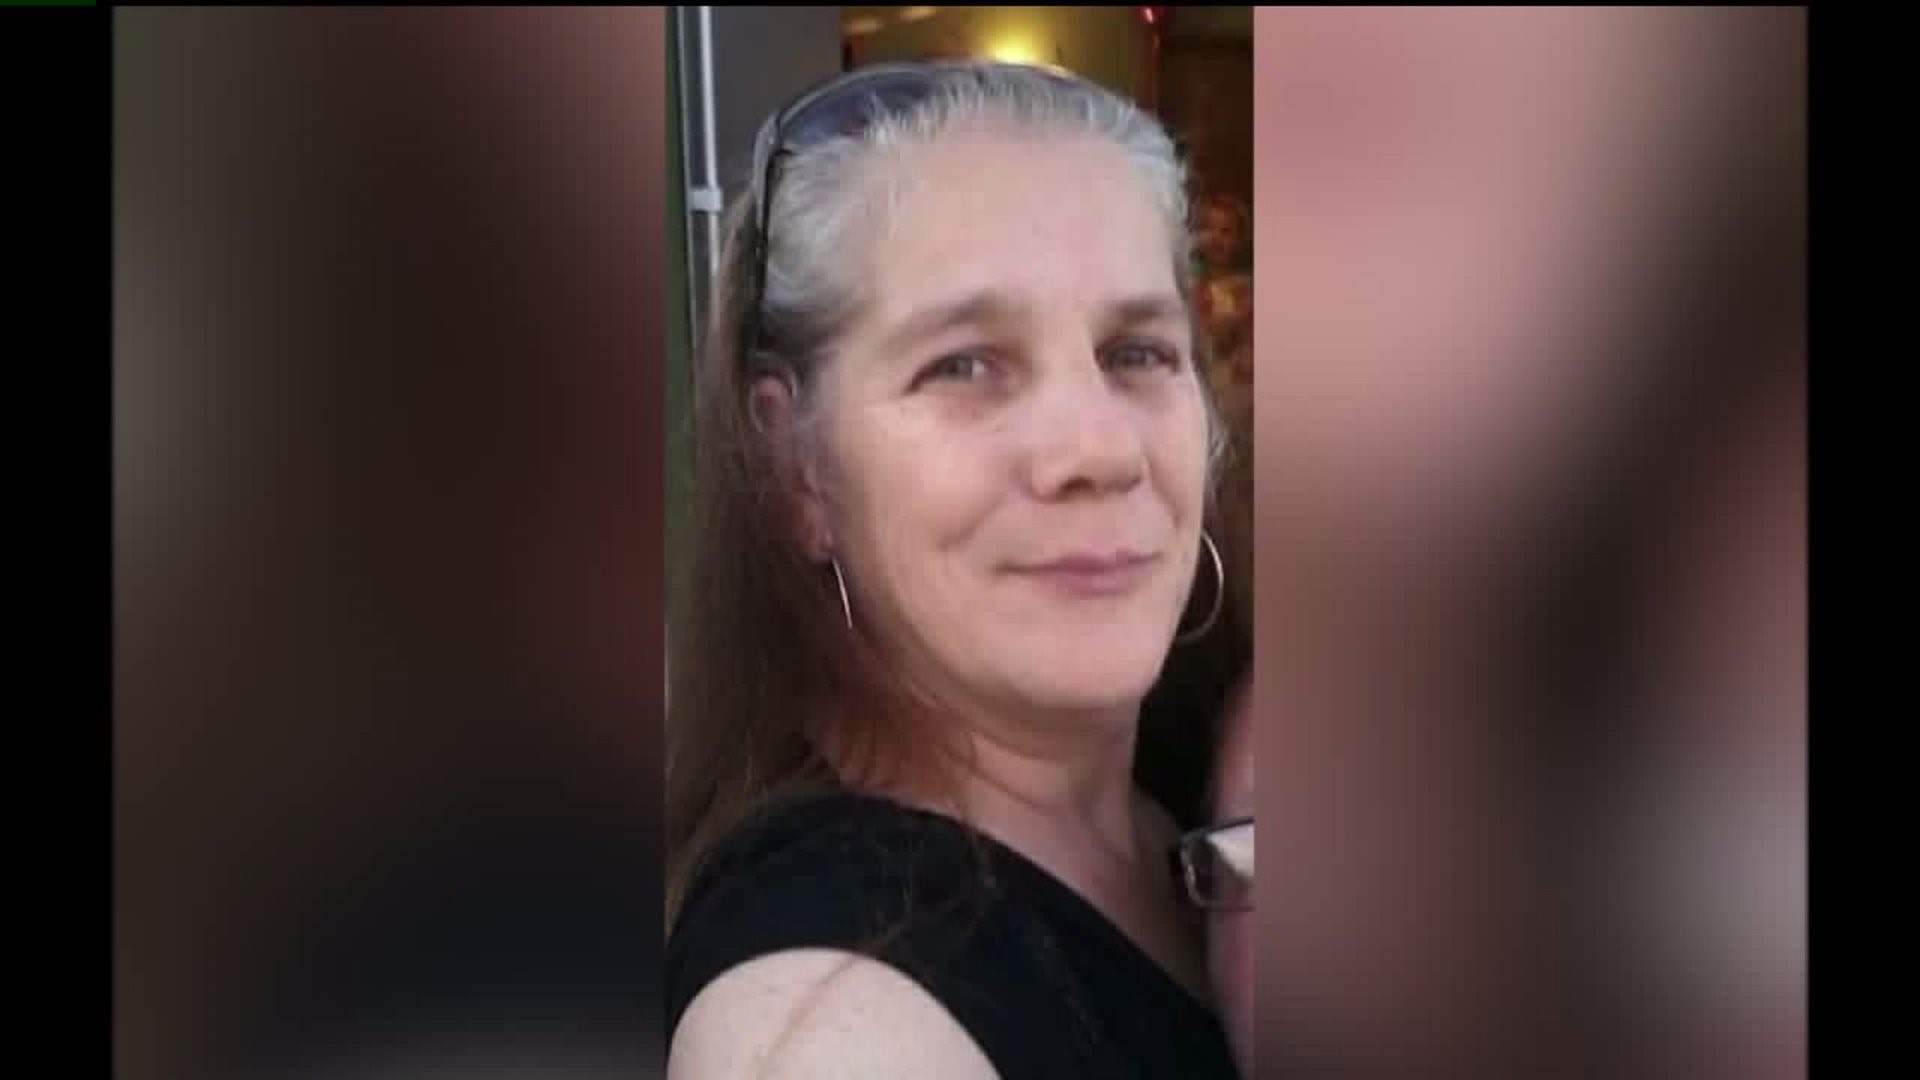 Search Continues for Woman Who Stole From Elderly